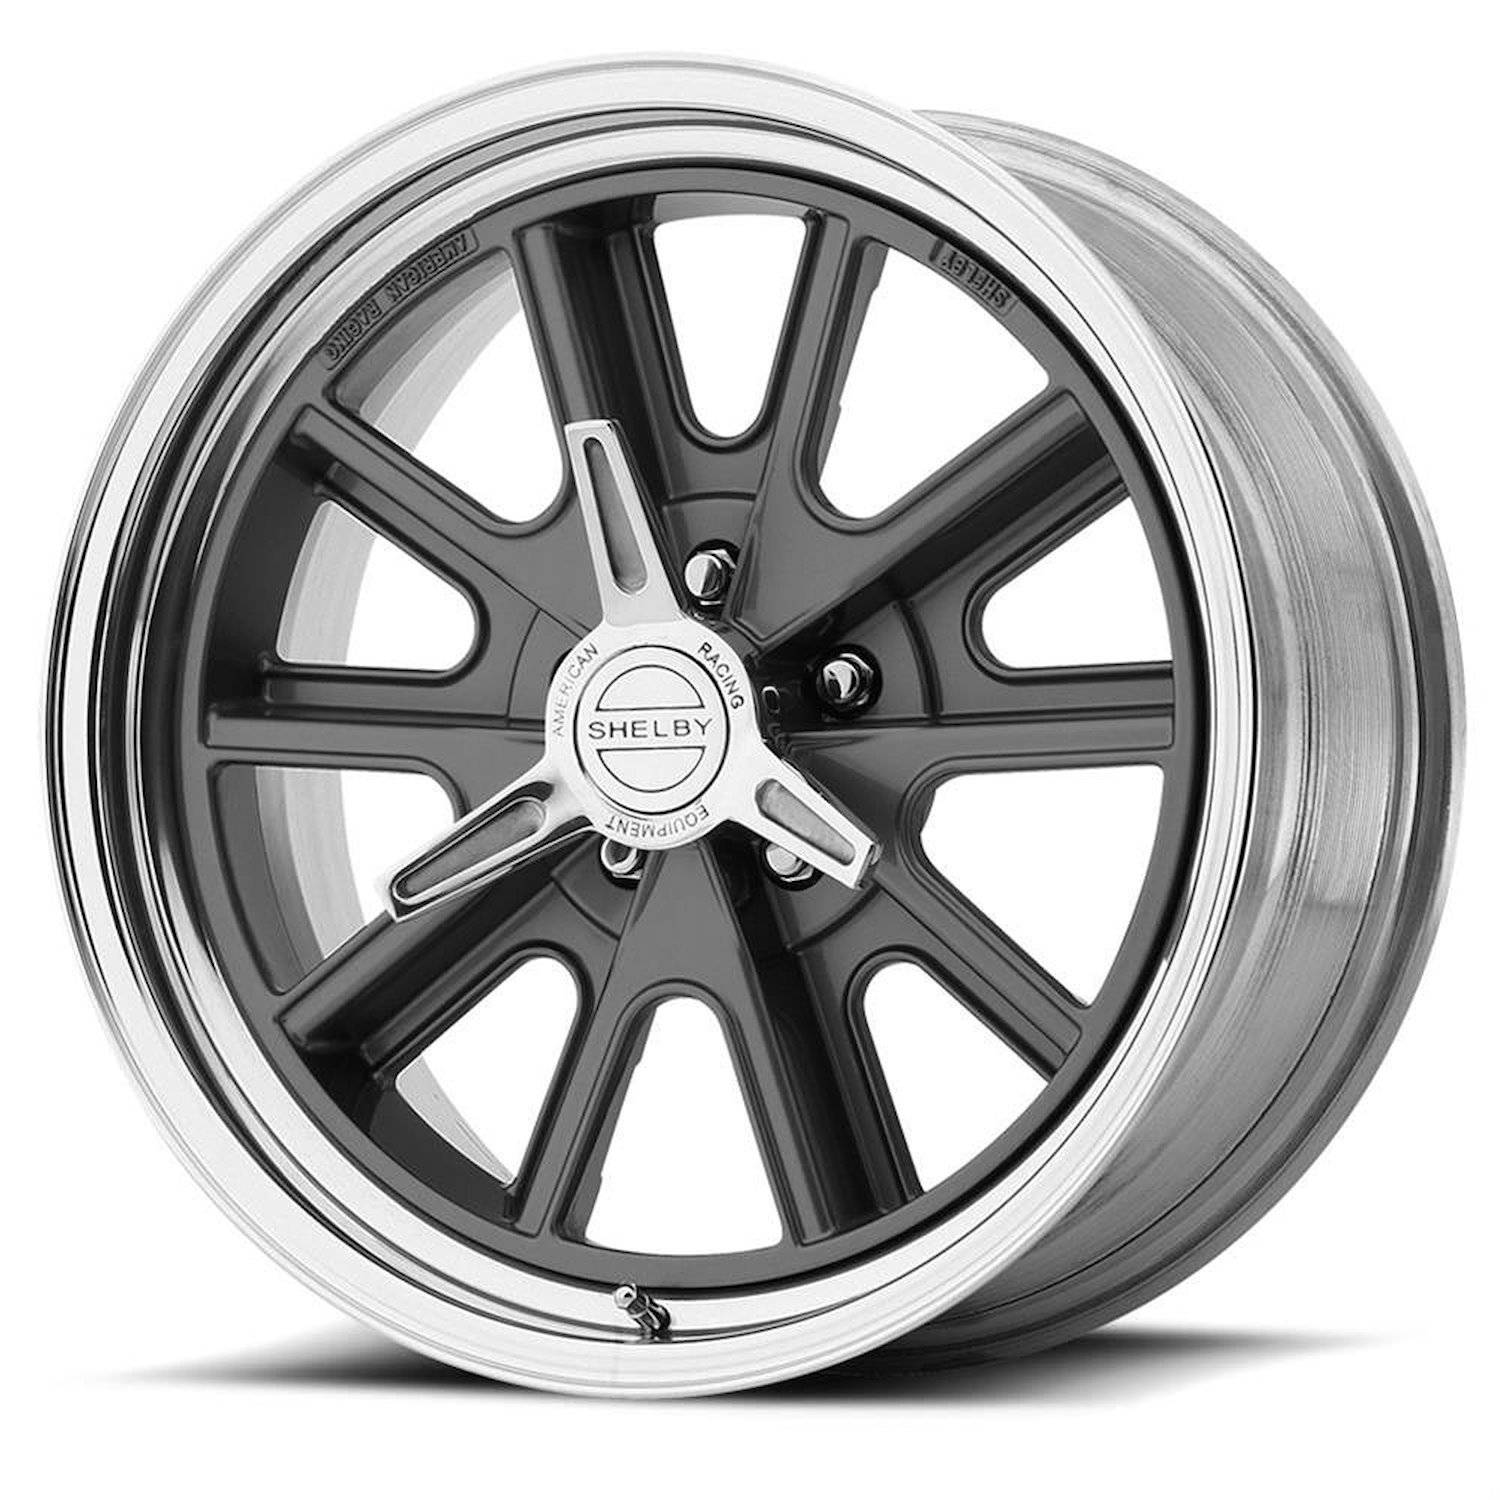 AMERICAN RACING 427 SHELBY COBRA TWO-PIECE MAG GRAY CENTER POLISHED BARREL 17 x 11 5x4.5 6 6.24